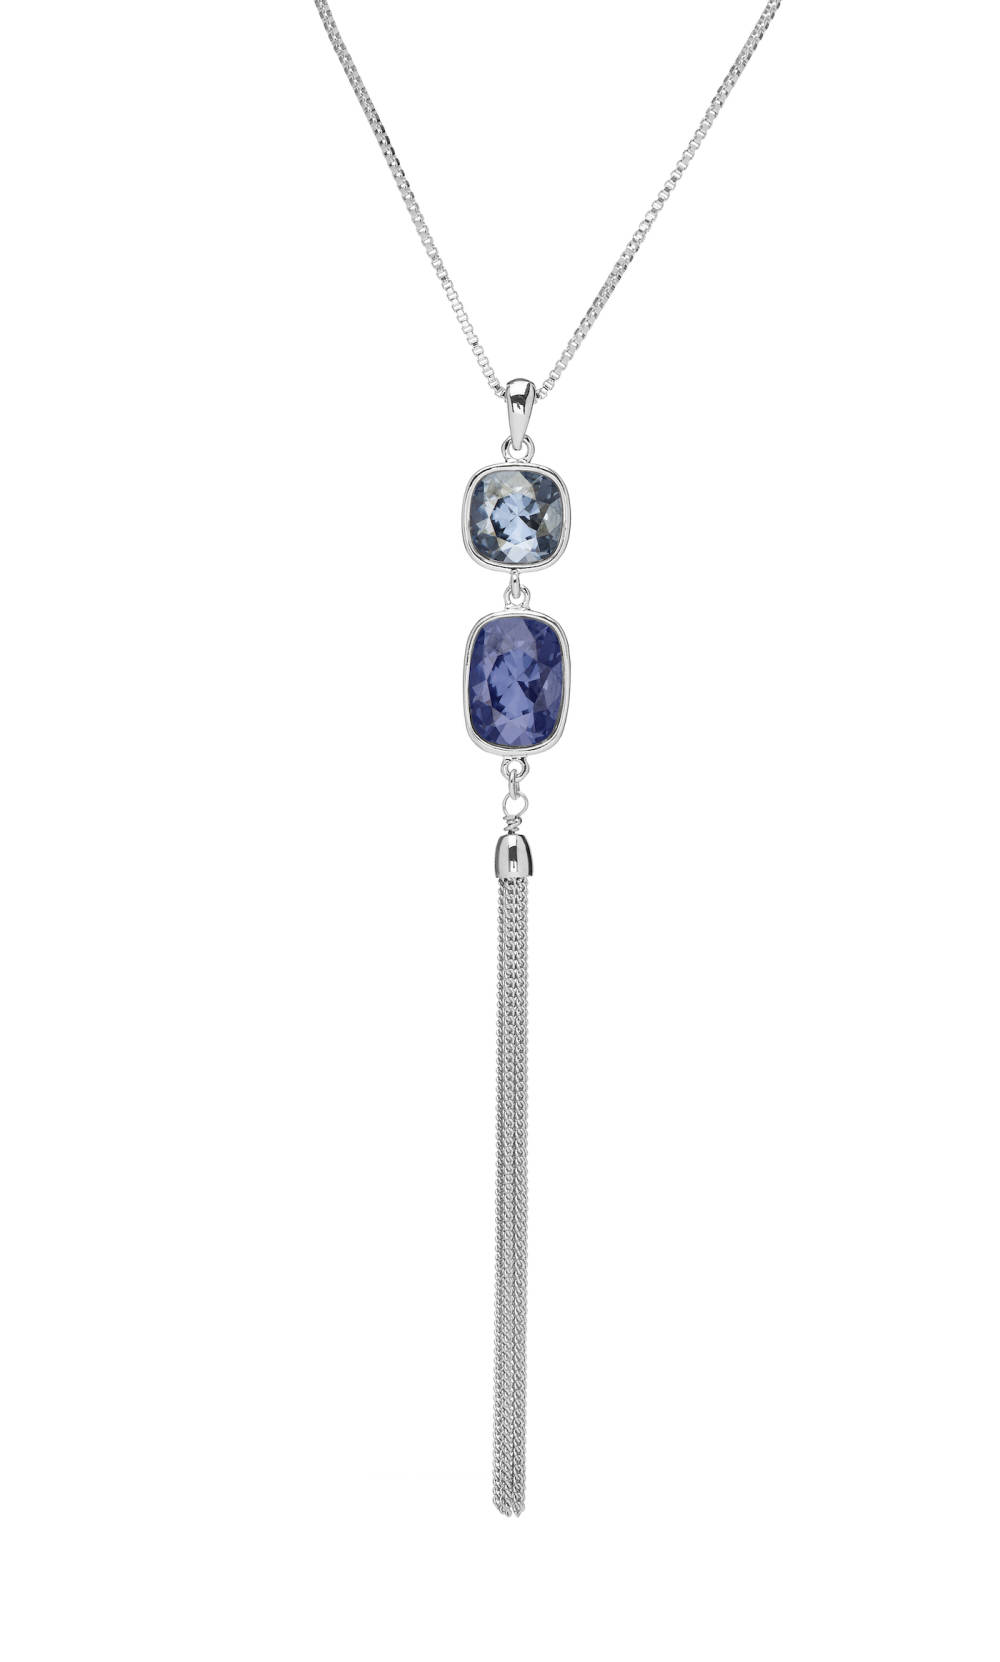 Montana Blue Shade Crystal Tassle Necklace made with Quality Austrian Crystals - MICALLA